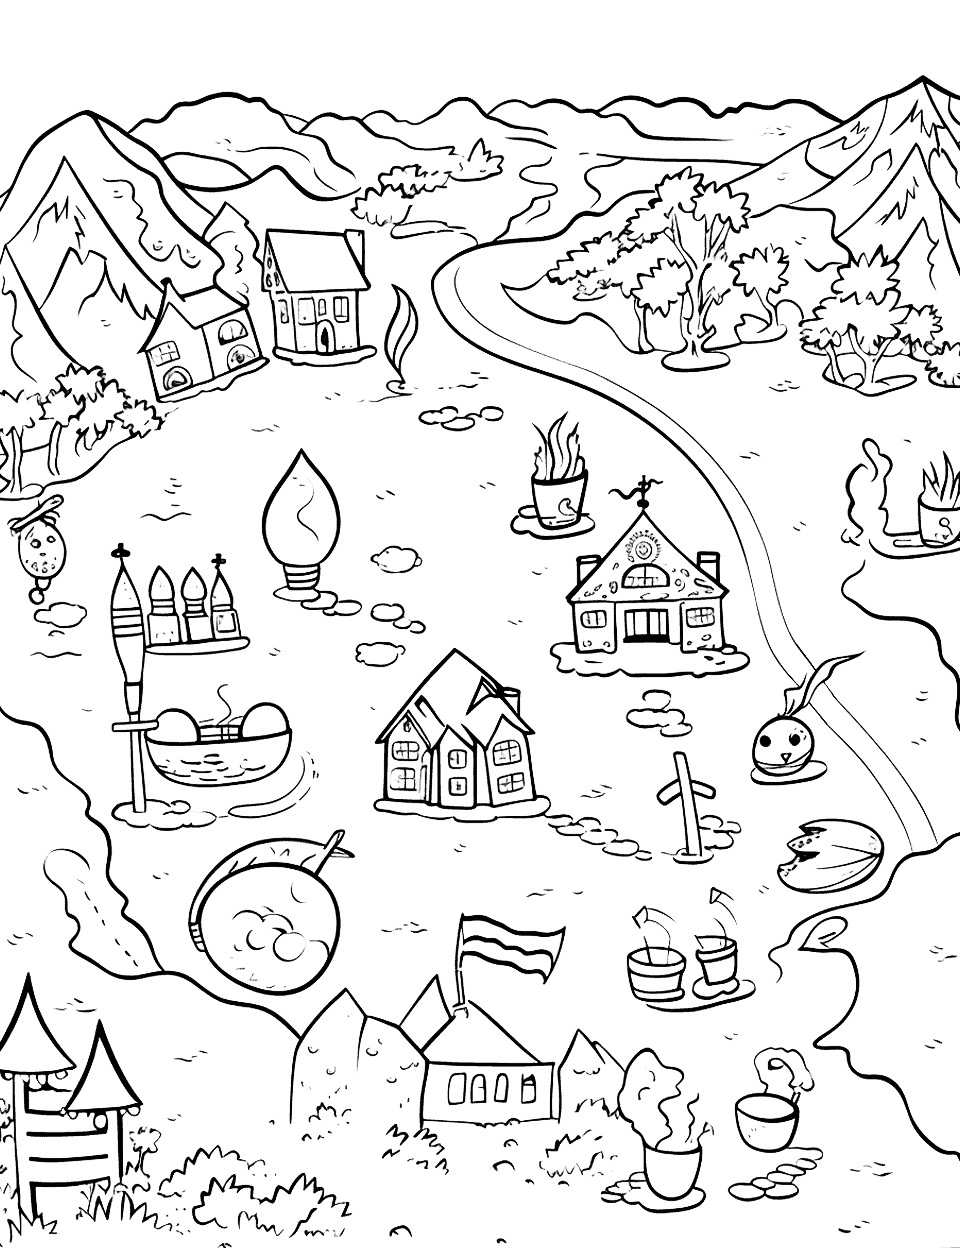 Easter Egg Hunt Map Coloring Page - A map showcasing a colorful landscape with marked spots for kids to color, representing different hiding places for Easter eggs during an egg hunt.